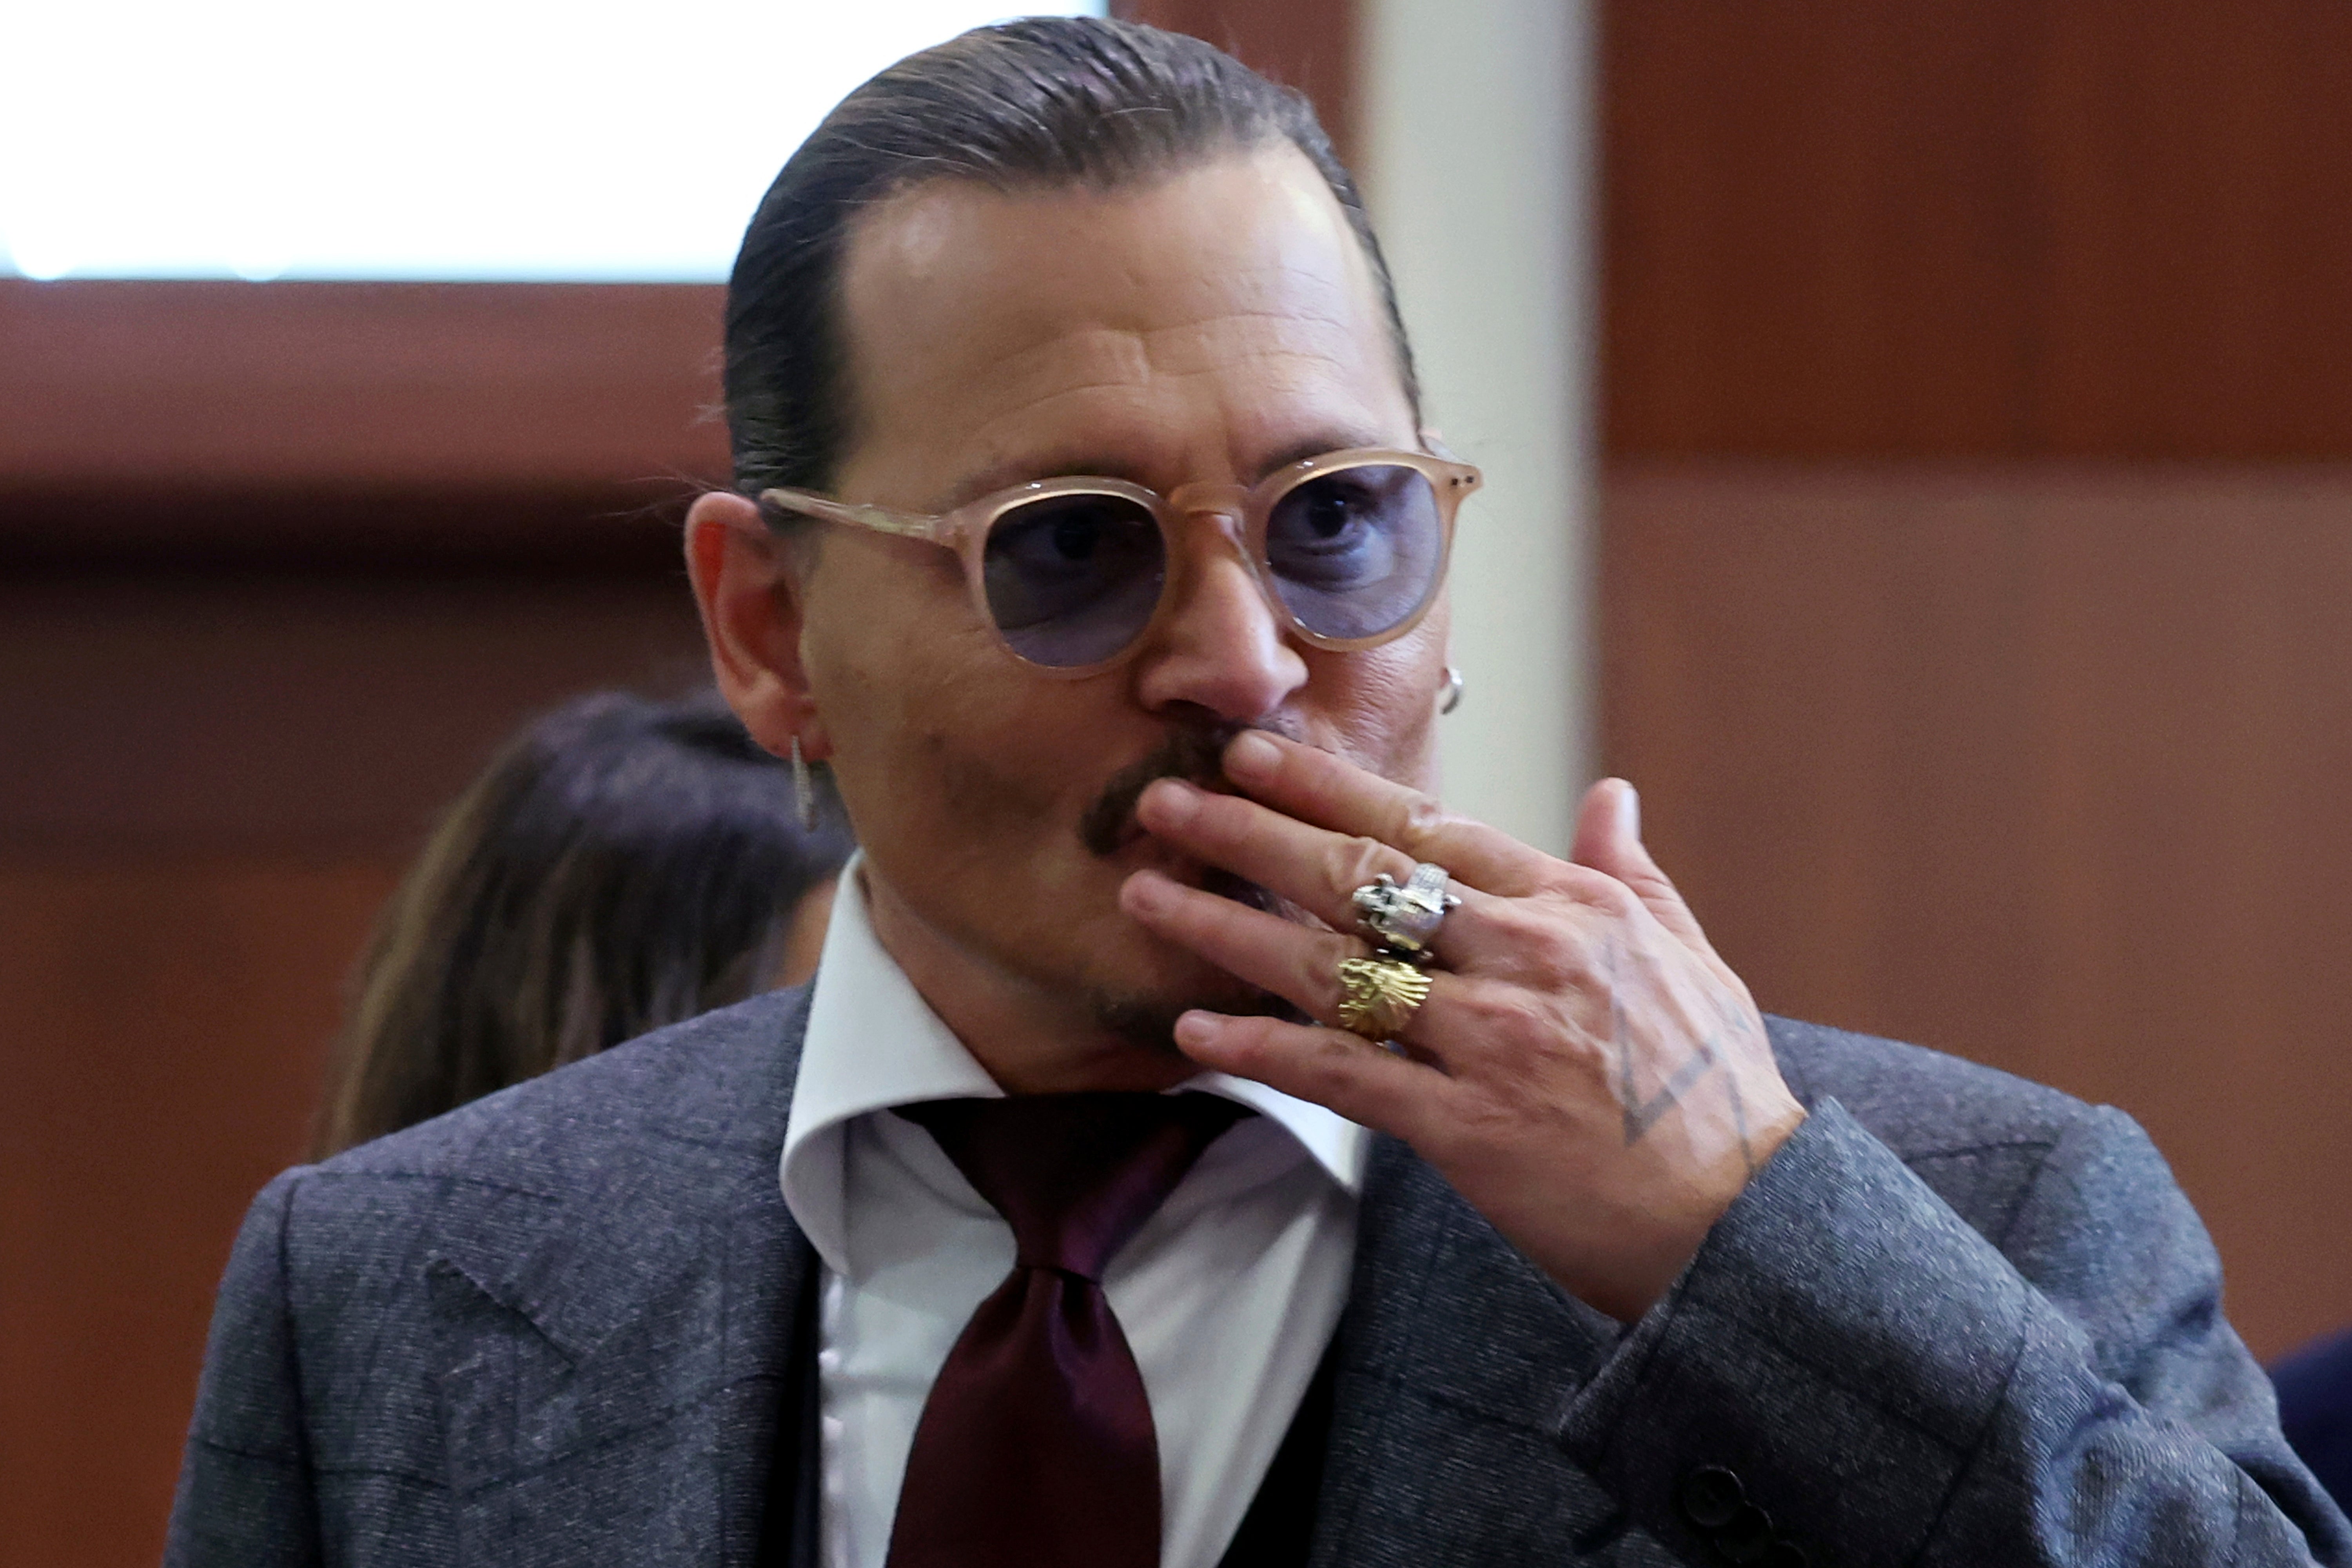 Actor Johnny Depp reacts to fans in the courtroom on Thursday